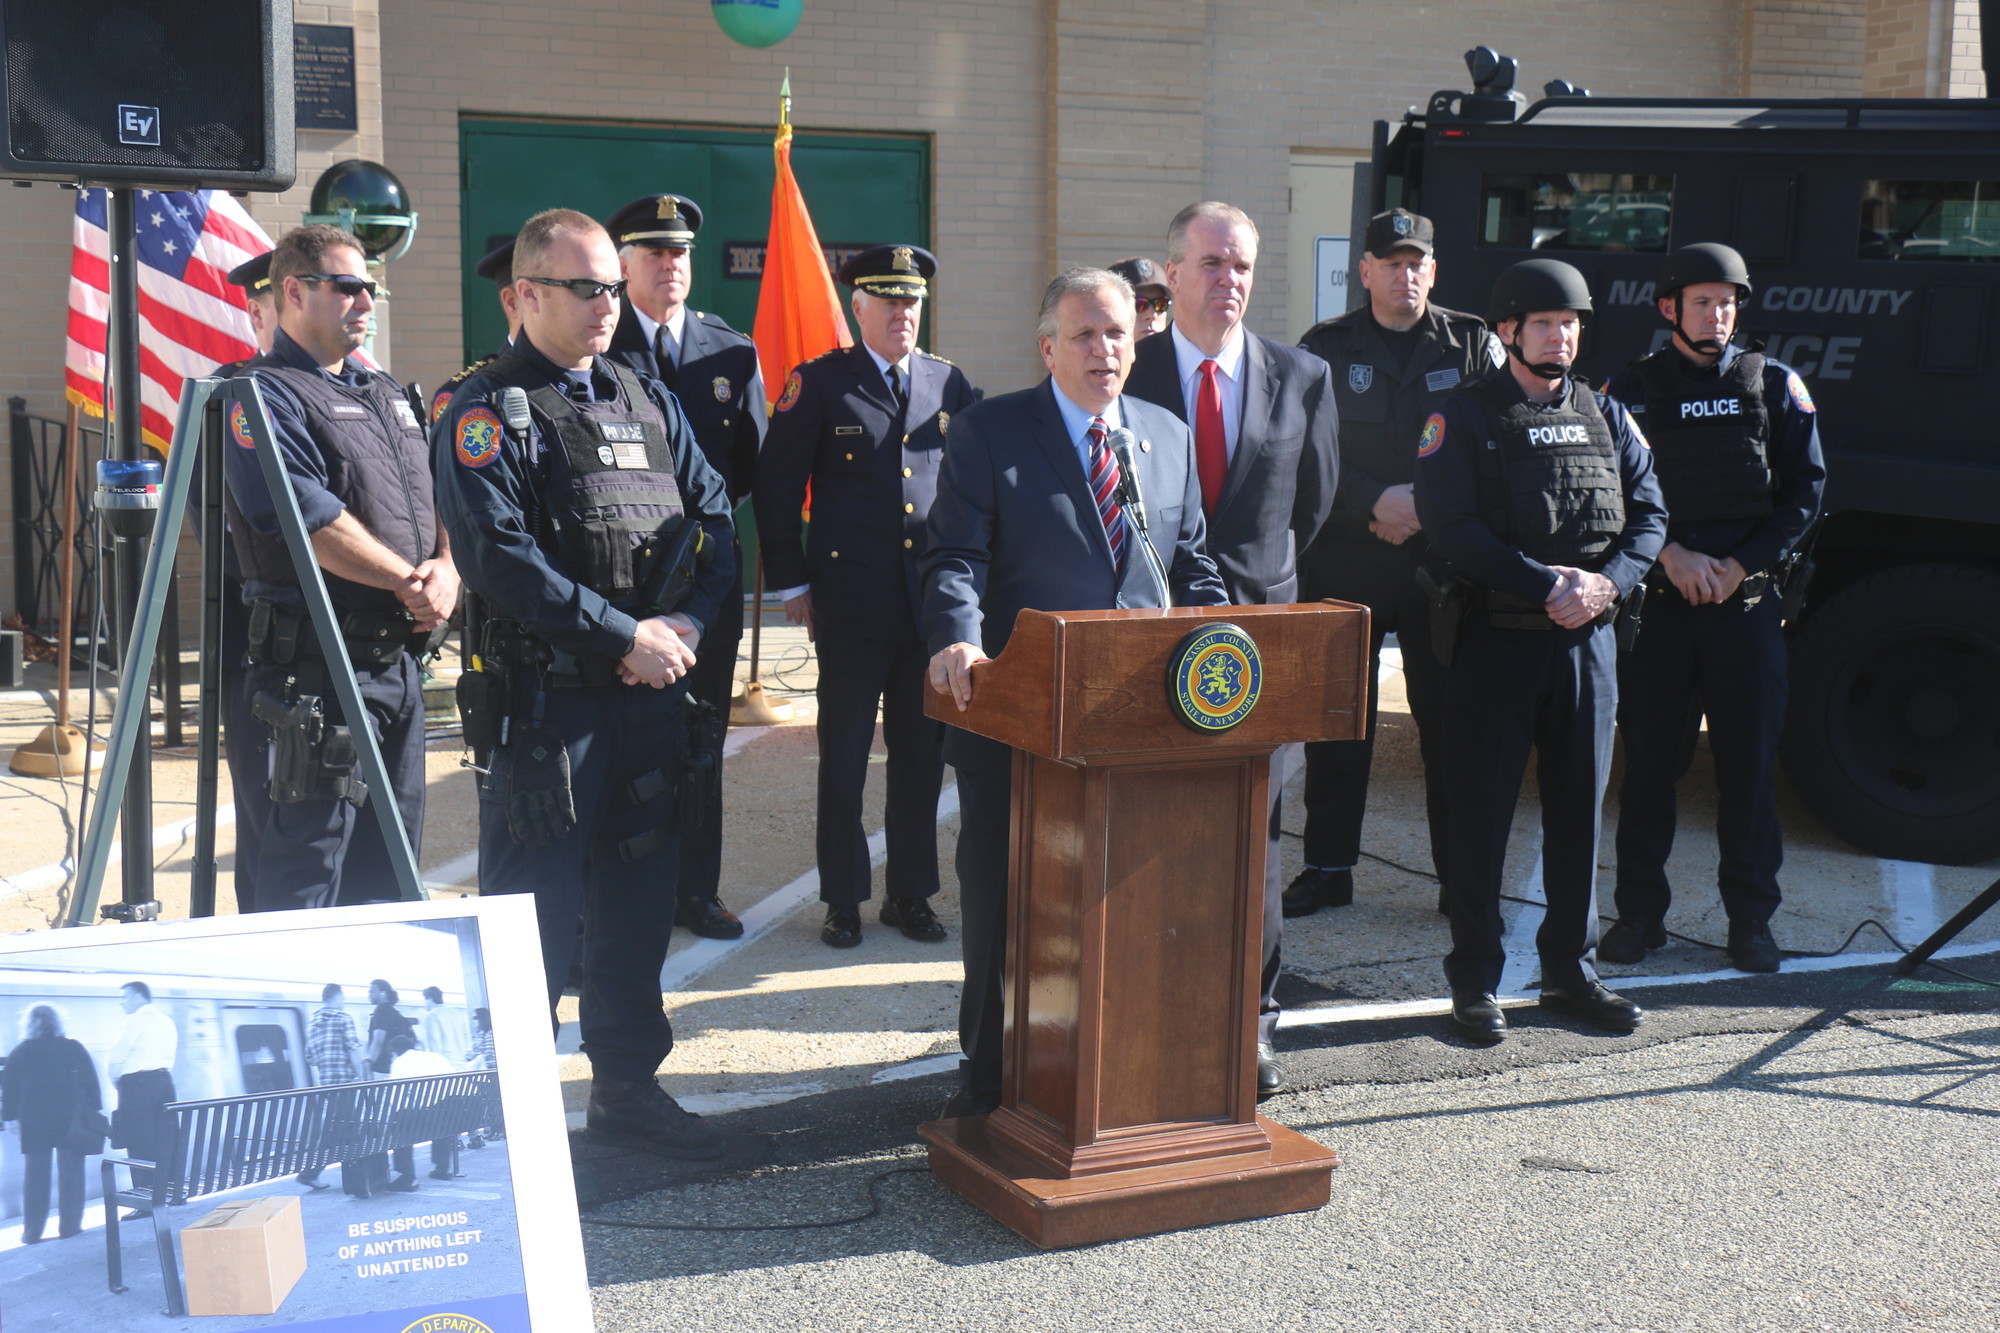 County Executive Edward Mangano spoke to the media about increased patrols in the county in the wake of the attacks in Paris.